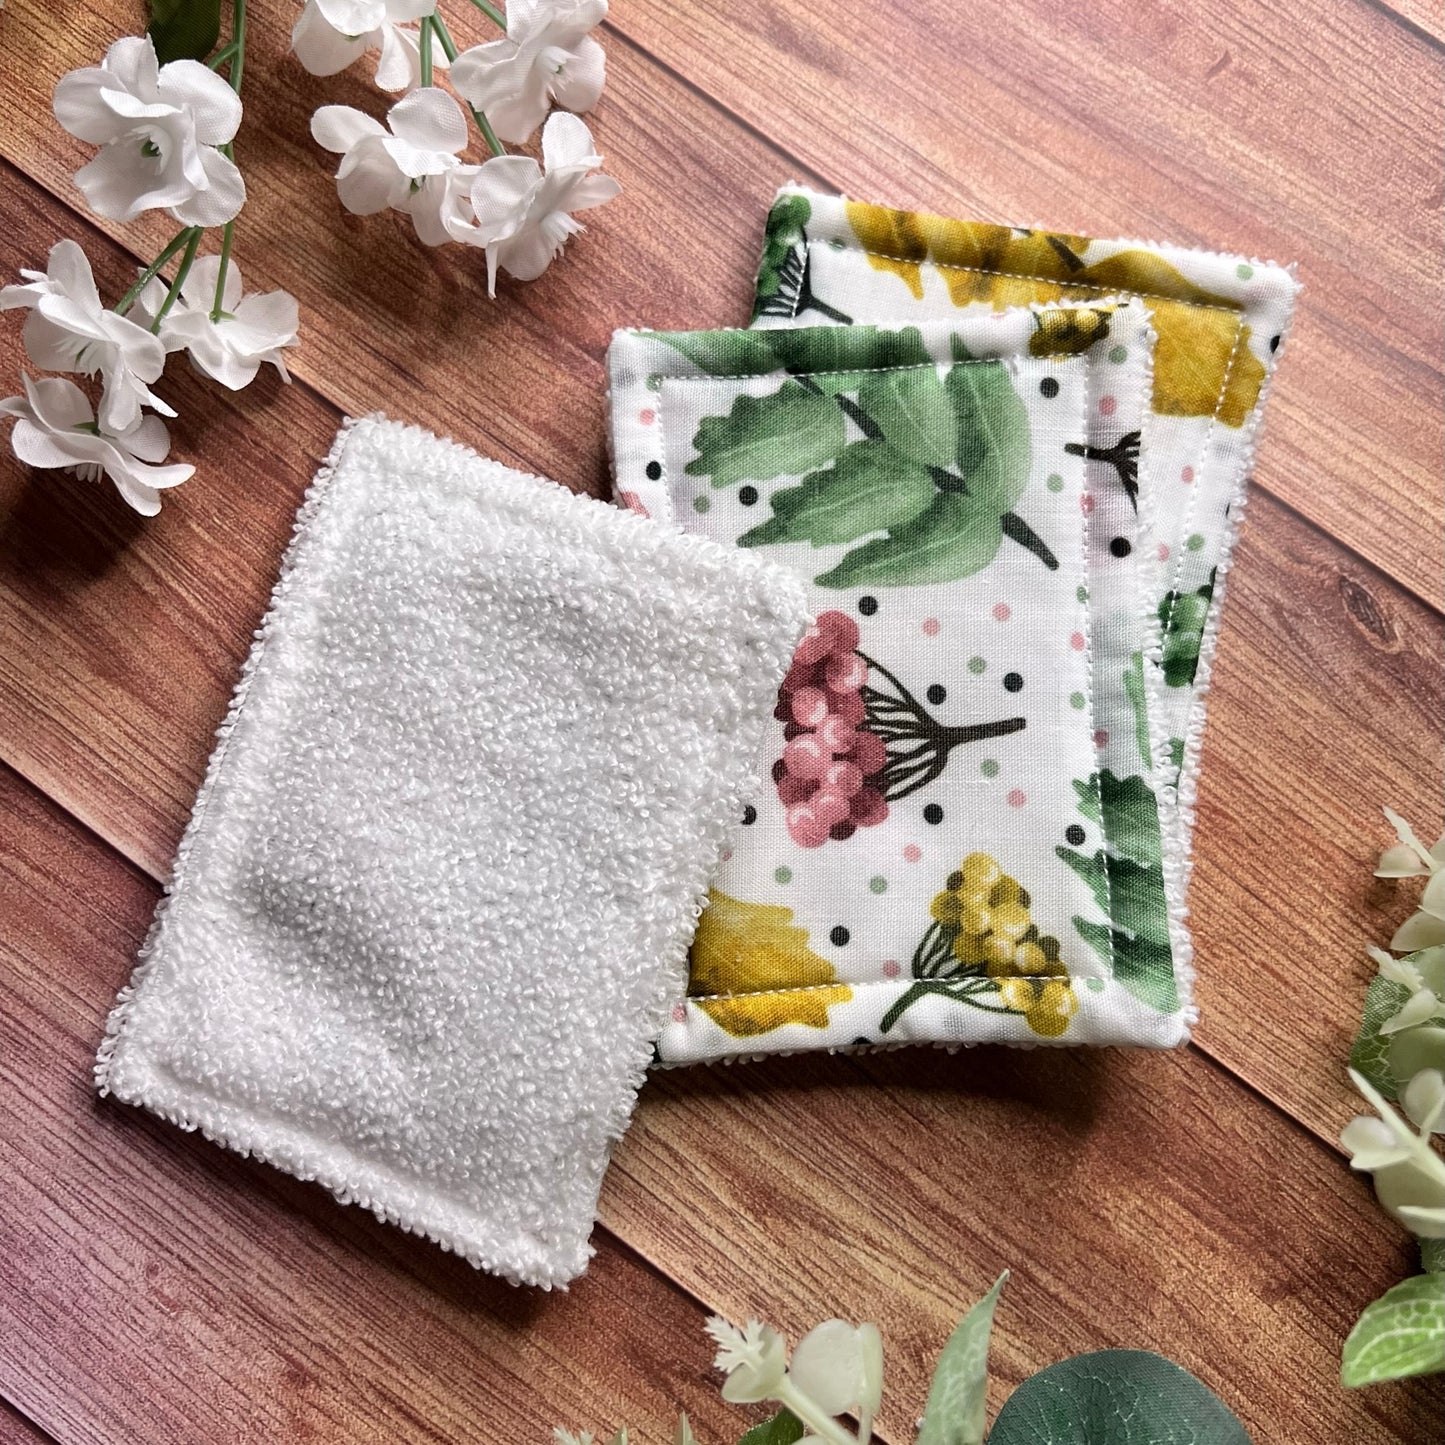 enjoy our range of self care gifts for women with theseexfoliating pads. These reusable skincare pads will help you achieve a more sustainable skincare routine.